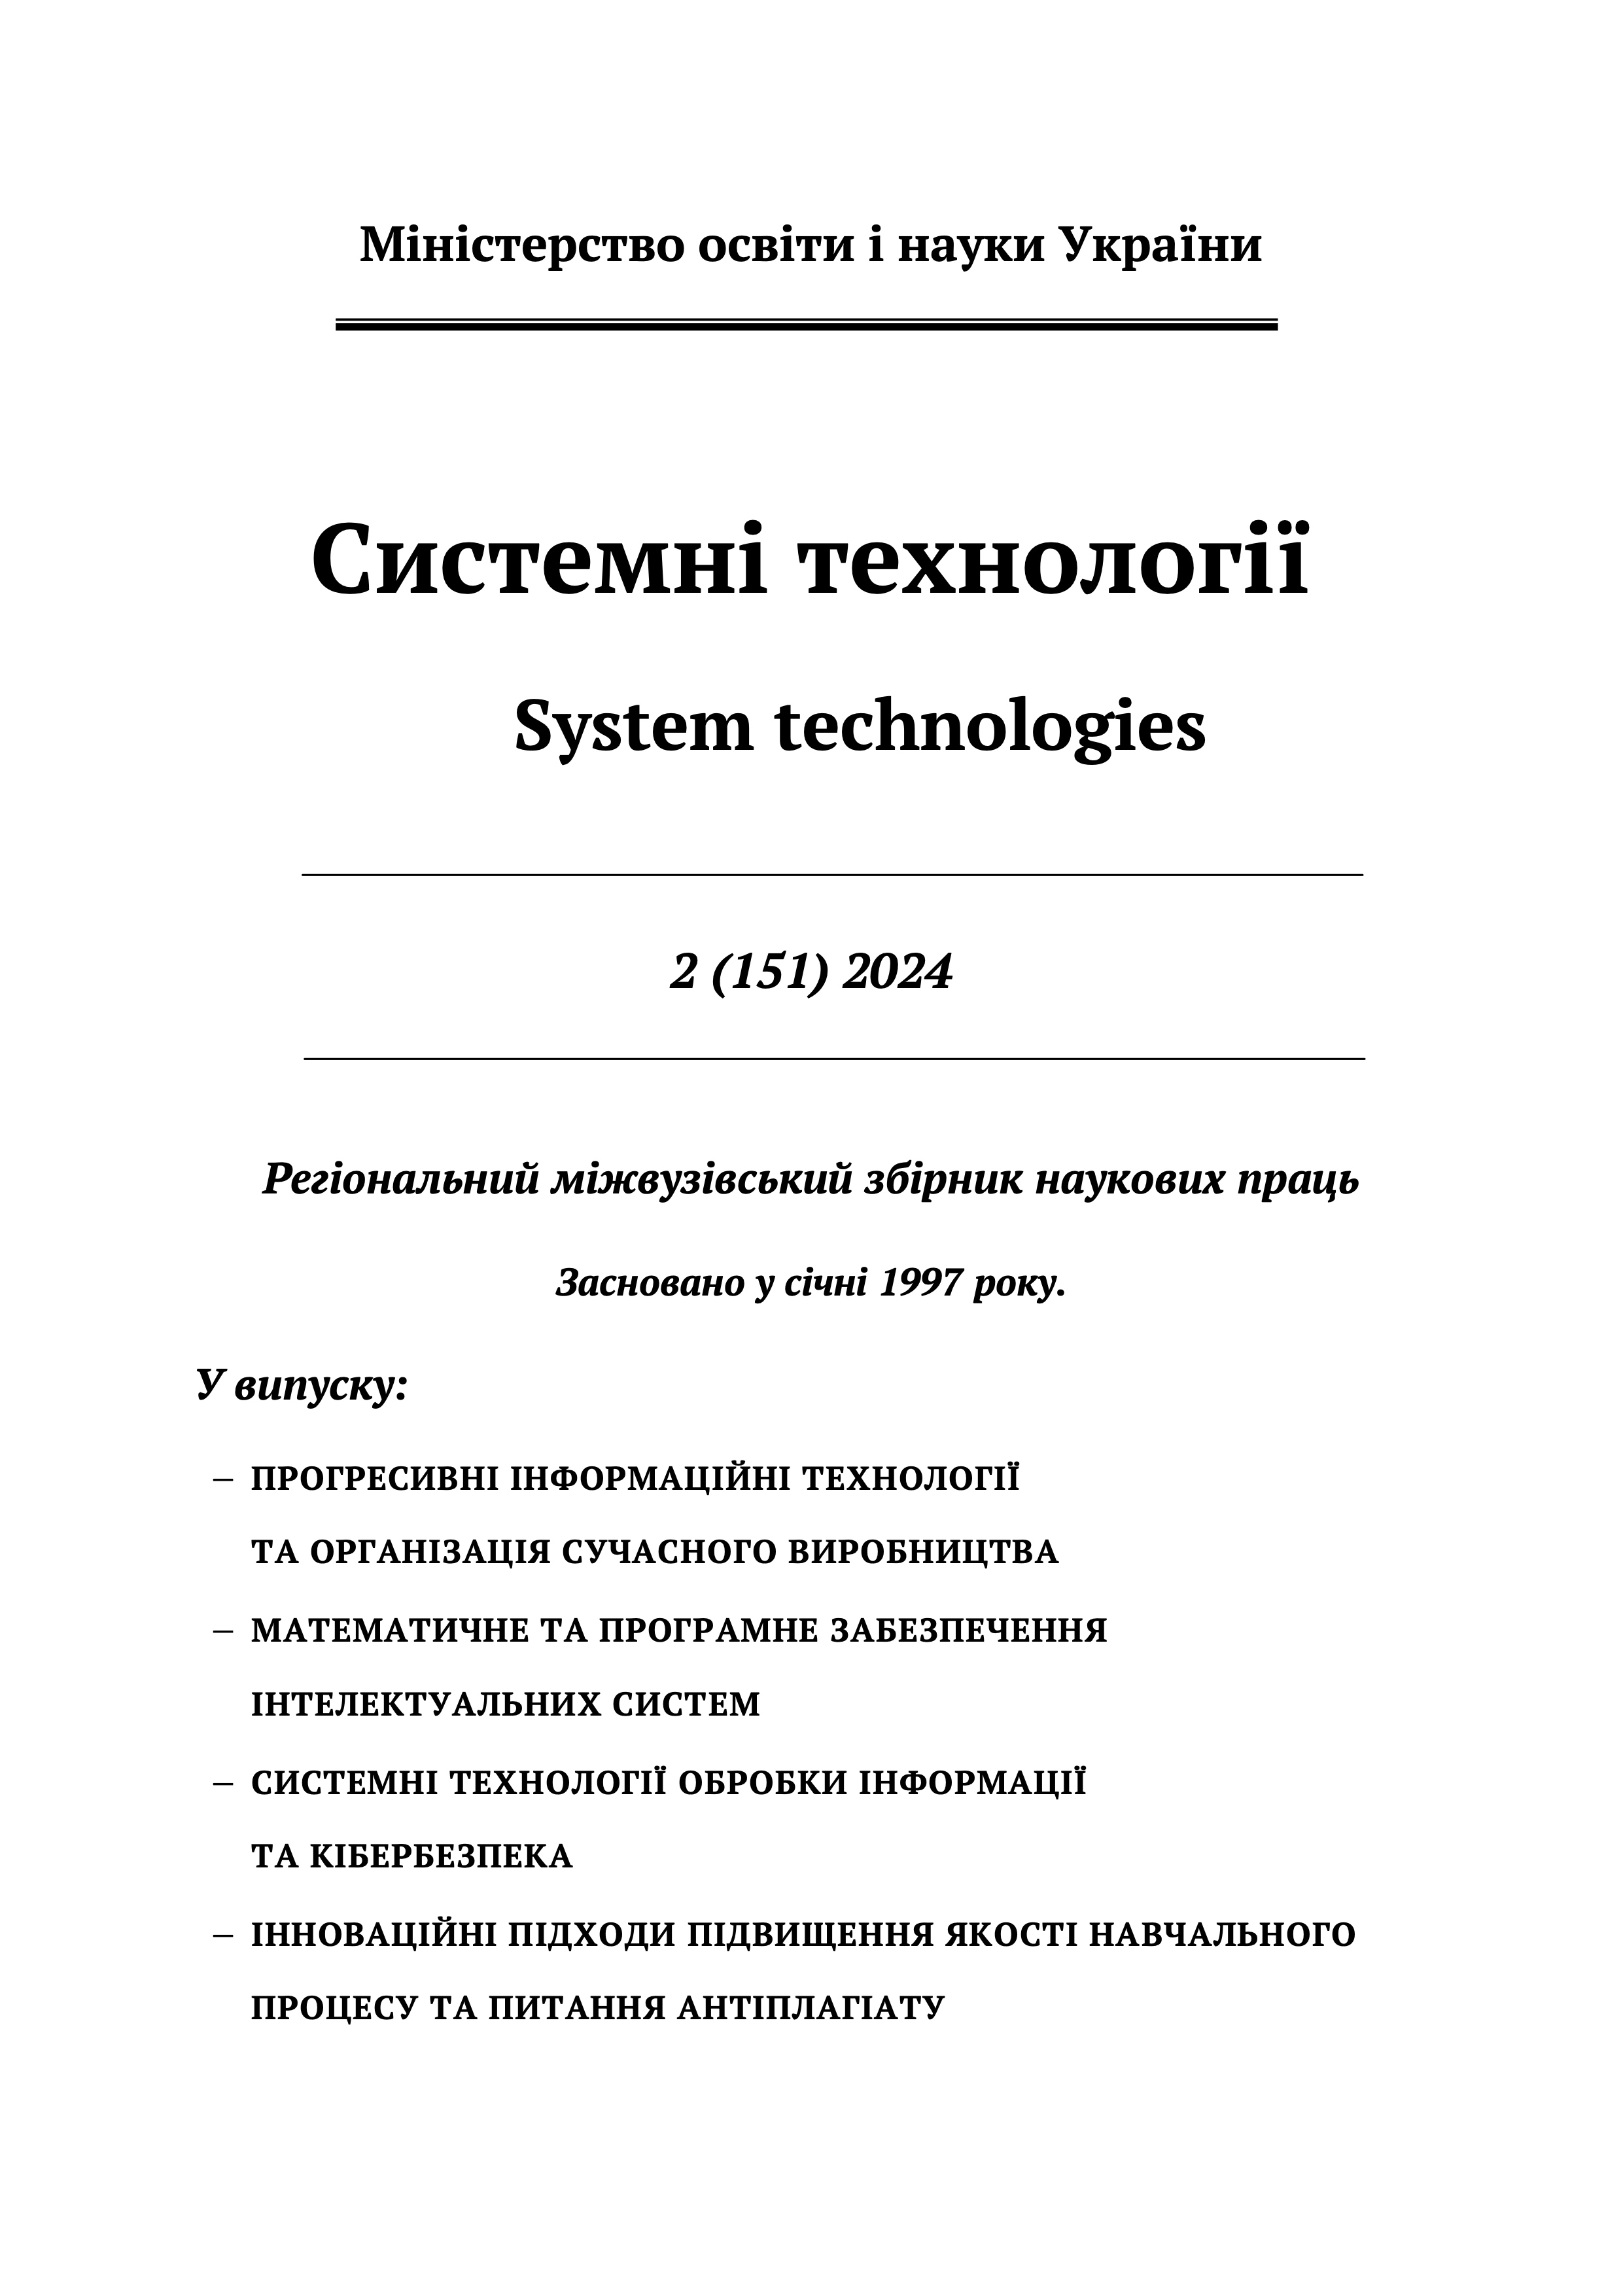 					View Vol. 2 No. 151 (2024): System technologies
				